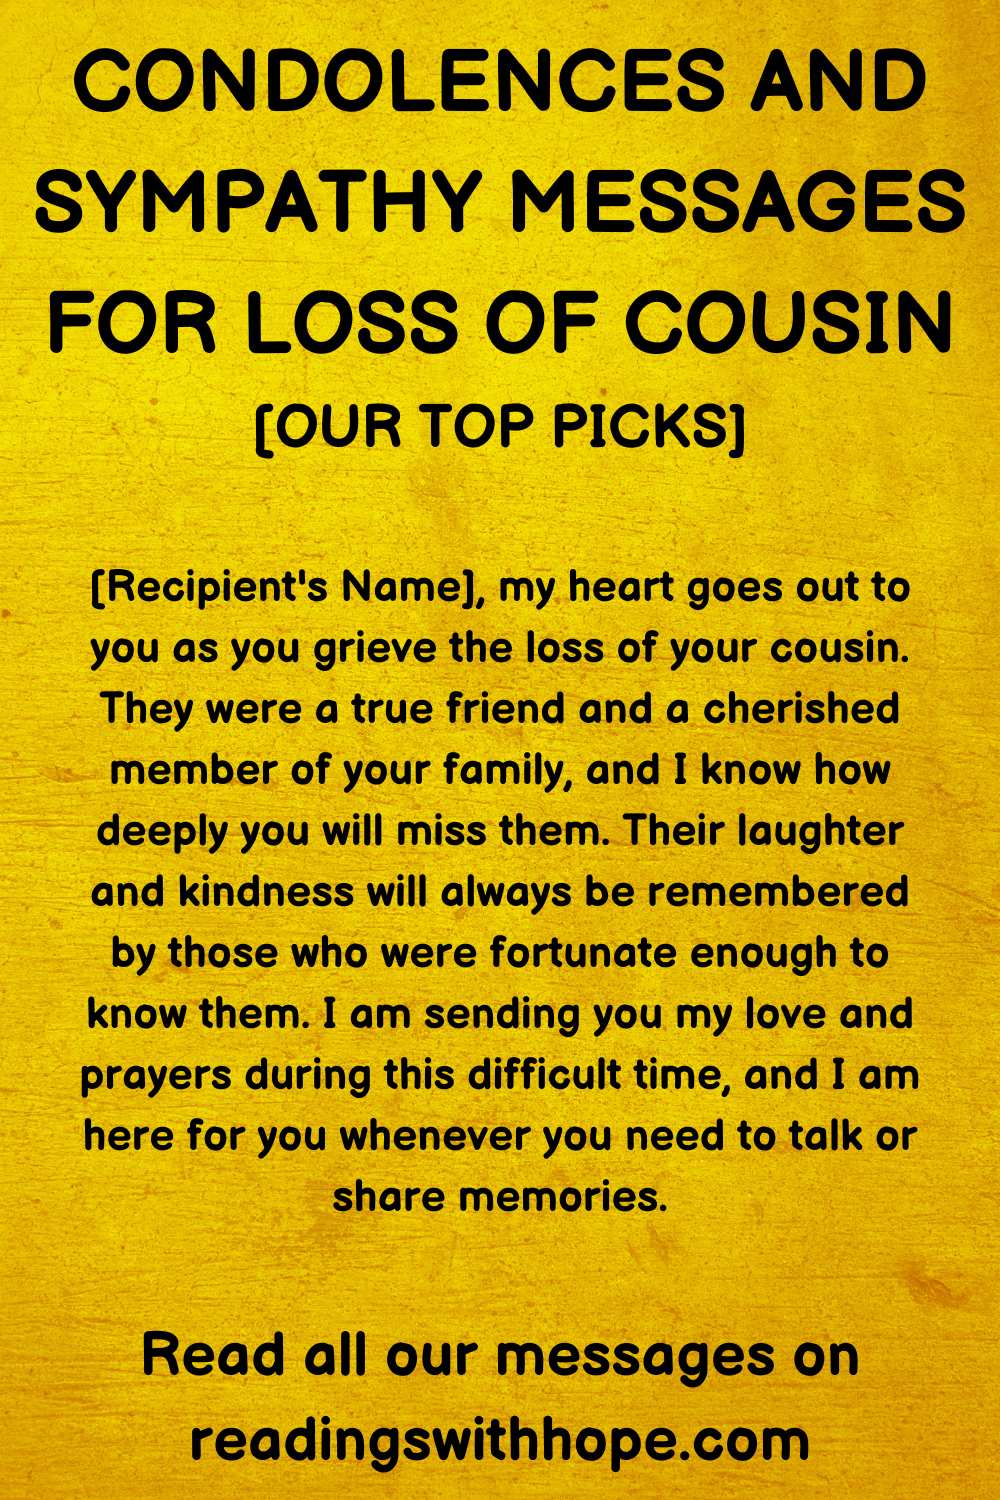 30 Condolences and Sympathy Messages for Loss of Cousin